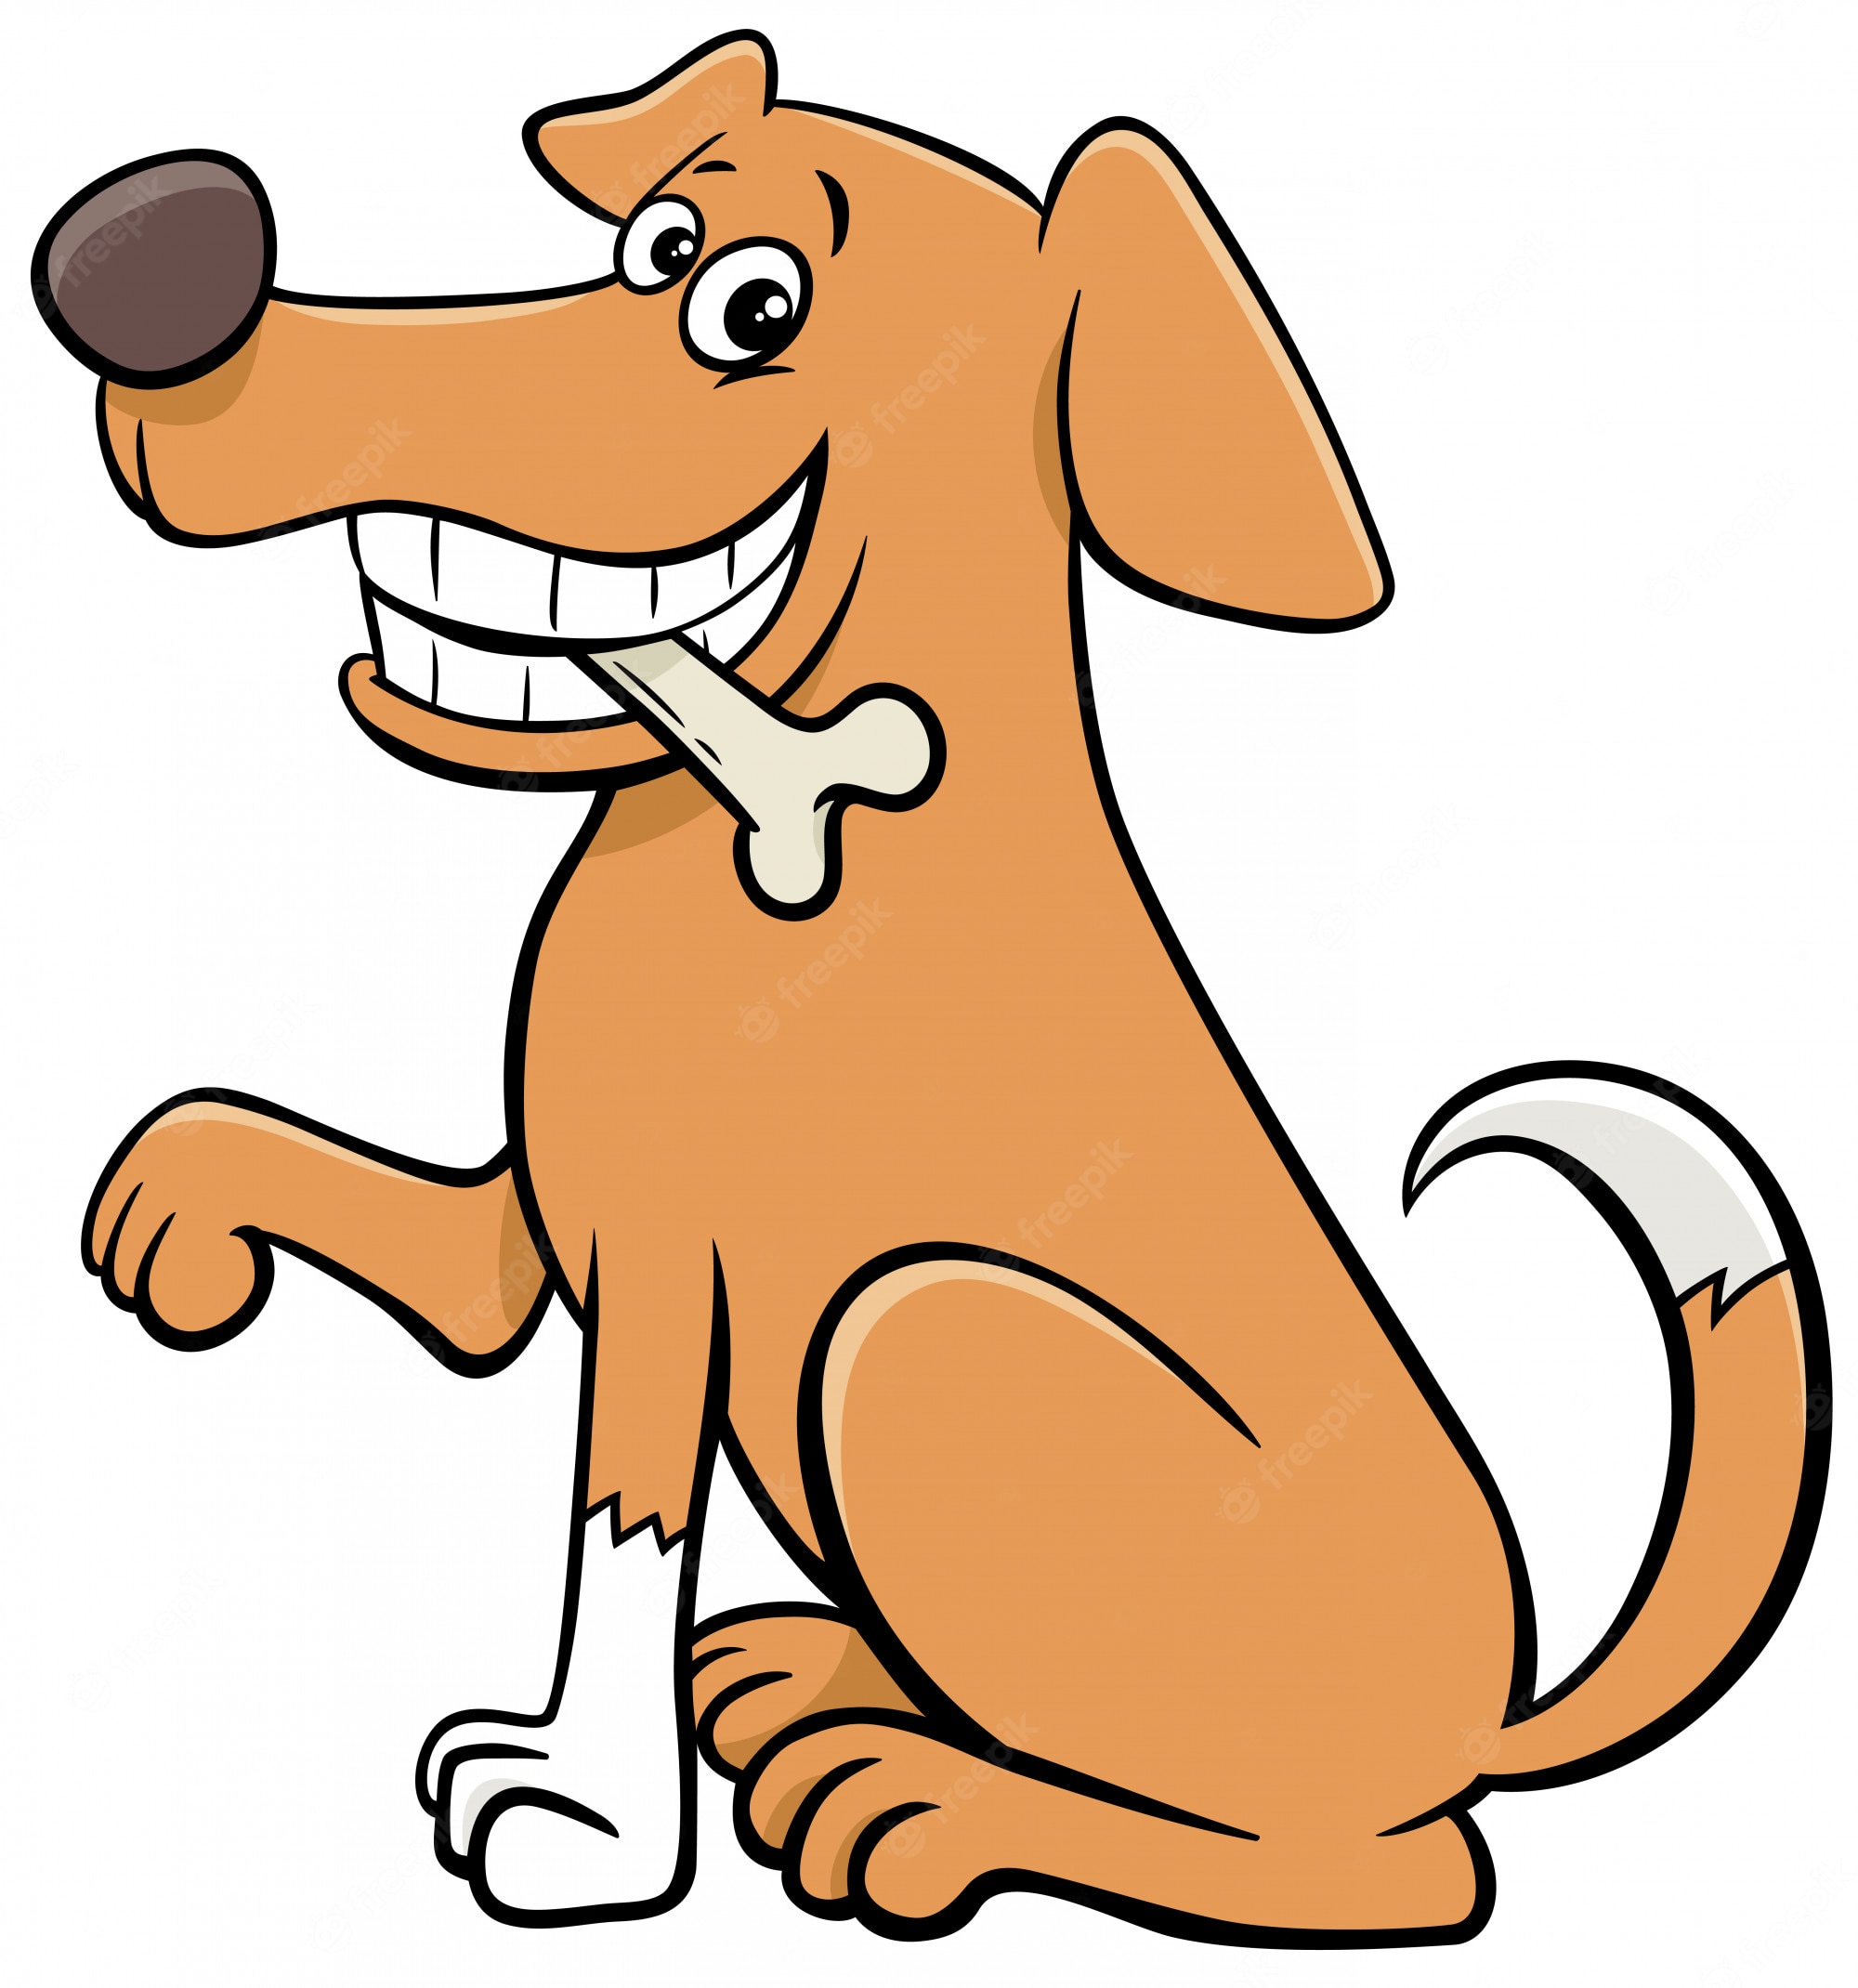 Barking Dog Cartoon Images - Free Download on Clipart Library - Clip ...